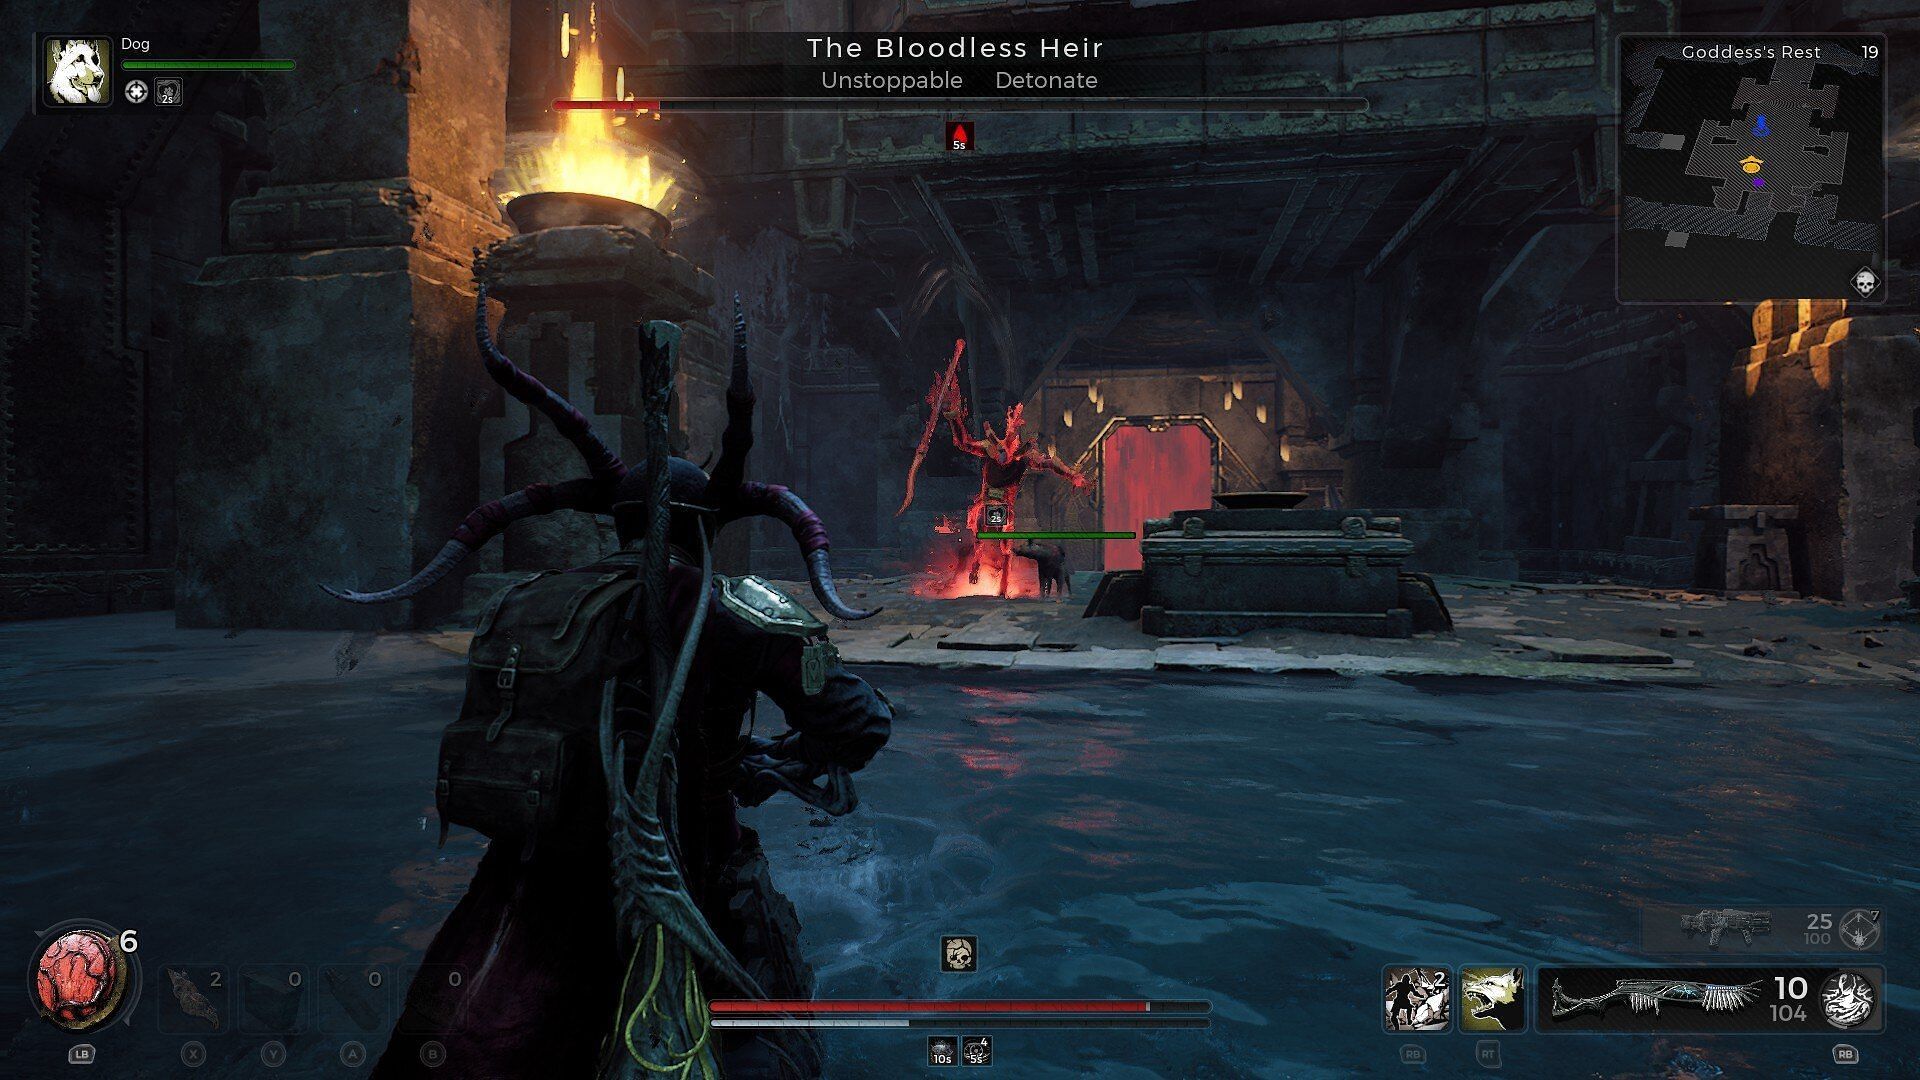 The Infinite Health build can help you breeze through boss fights (Image via Gunfire Games)